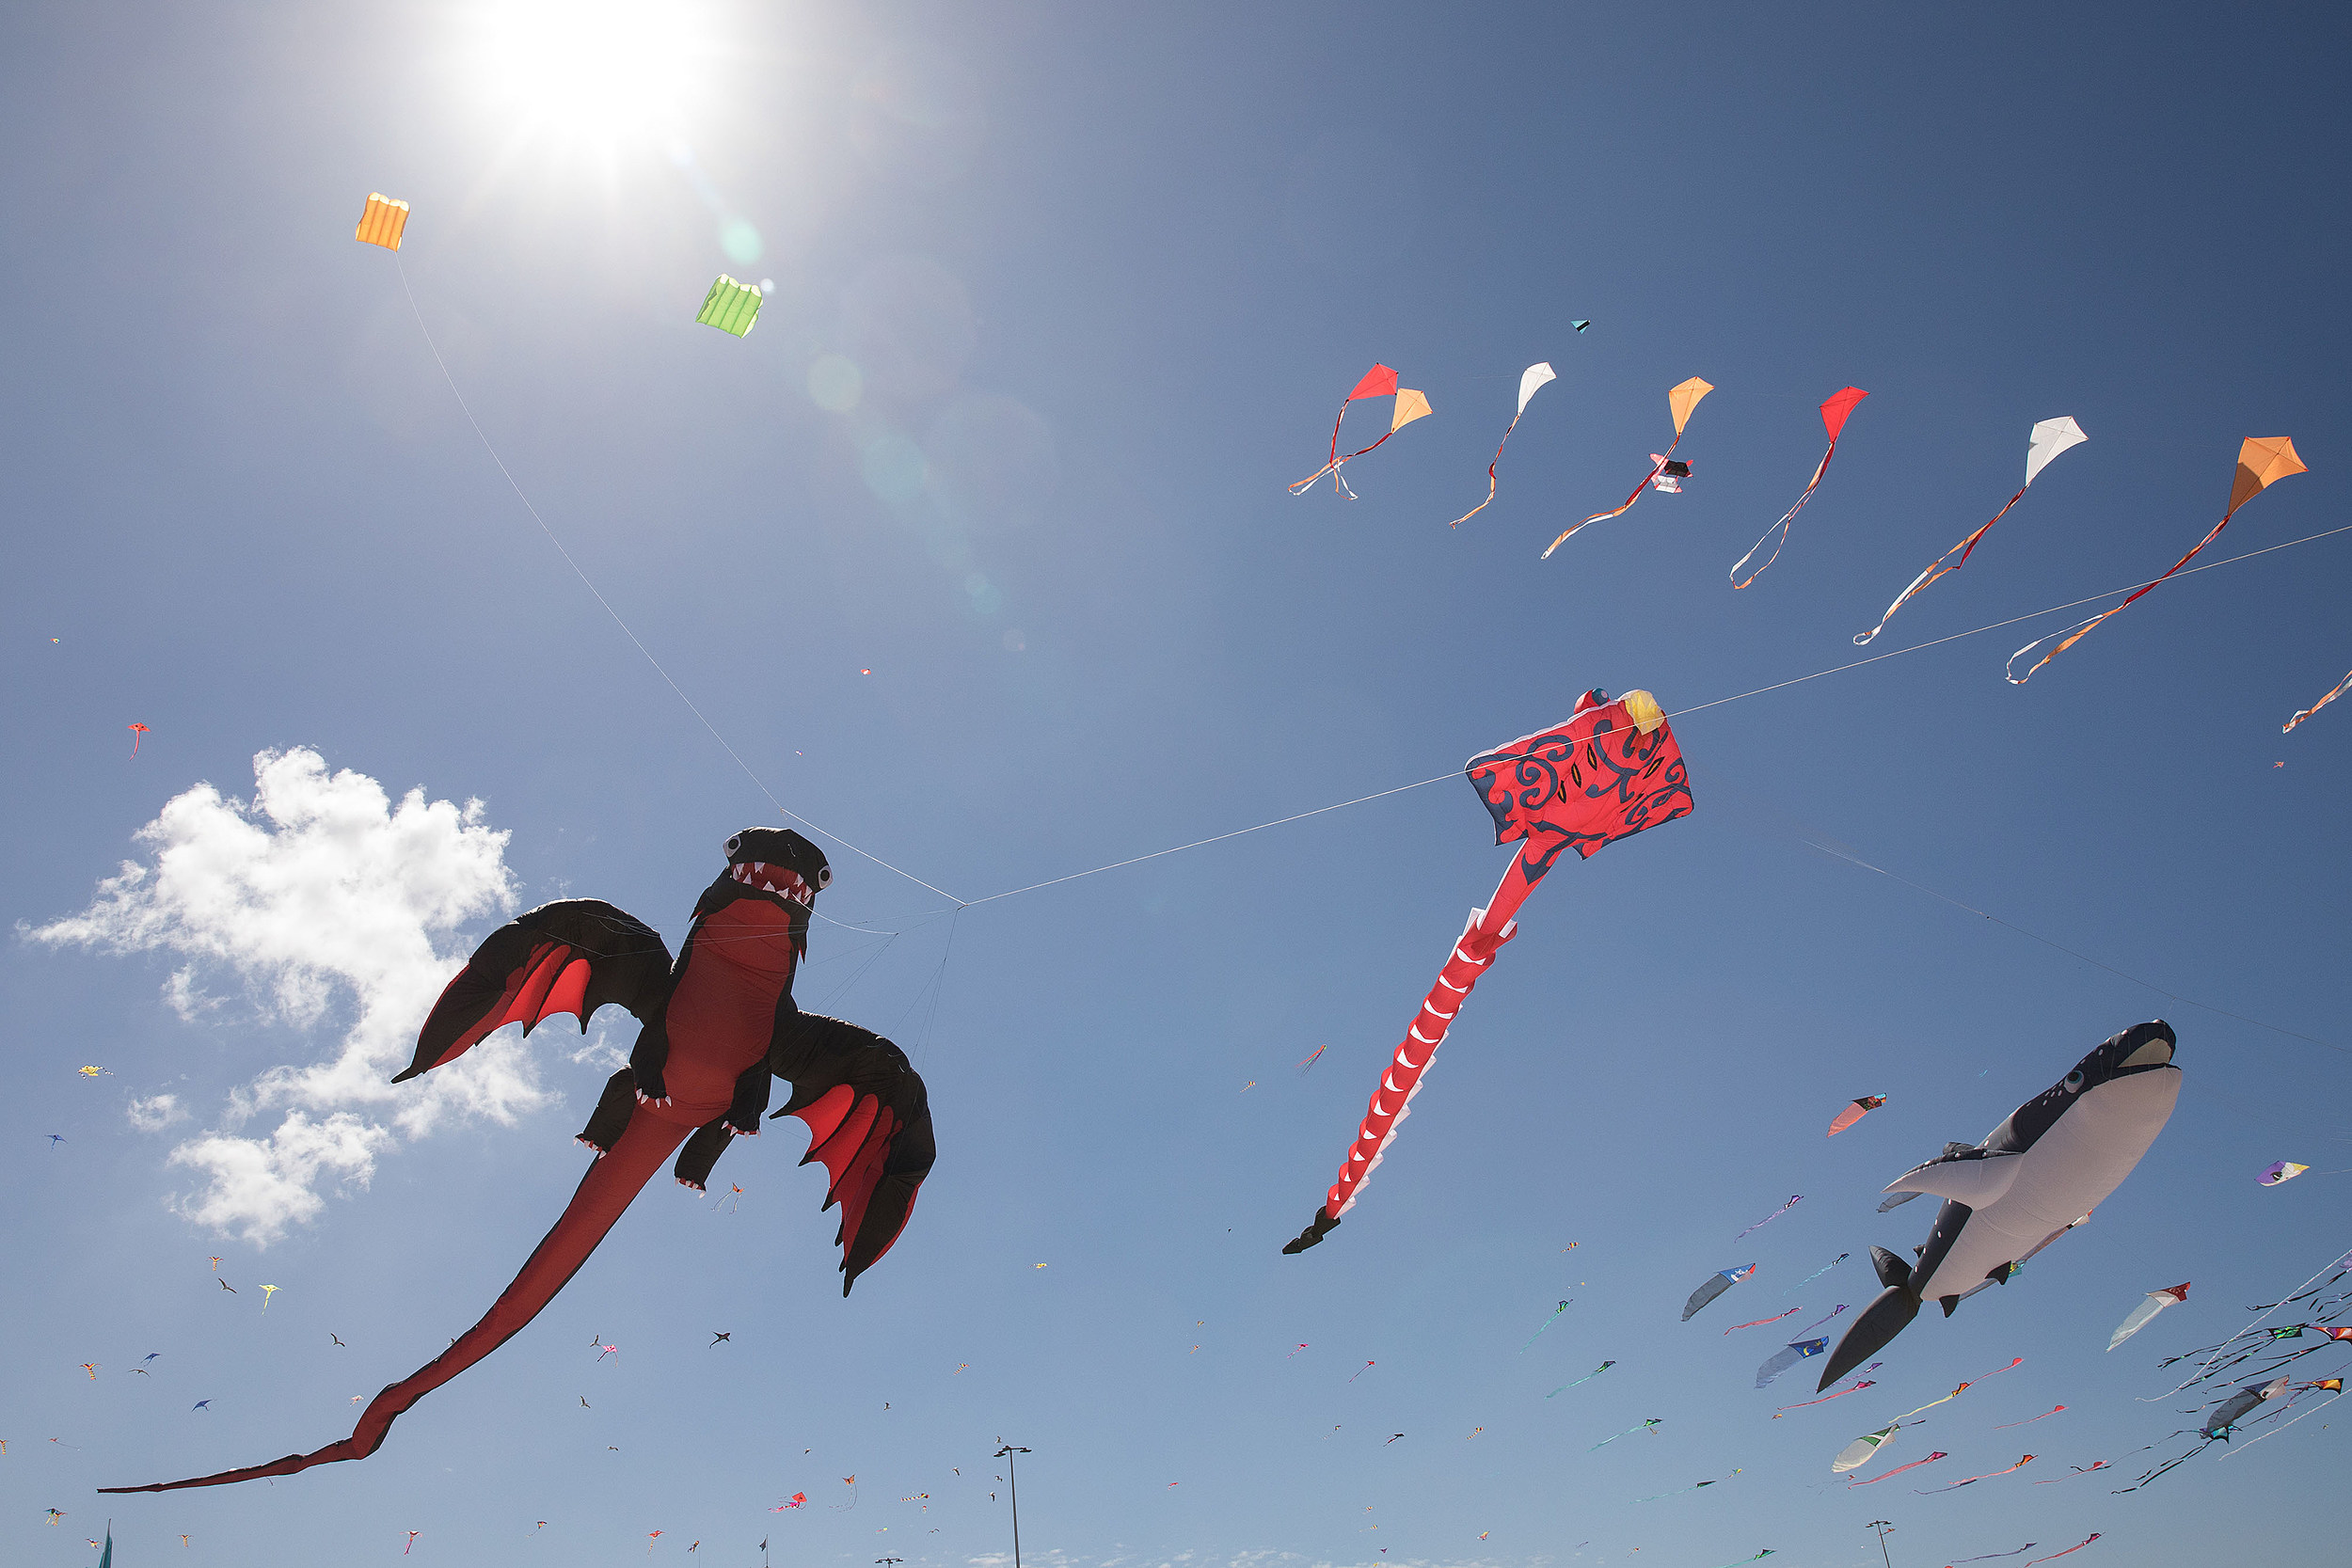 FREE Food, T-Shirts at 2 Fun Kite-Flying Kids Events on Saturday